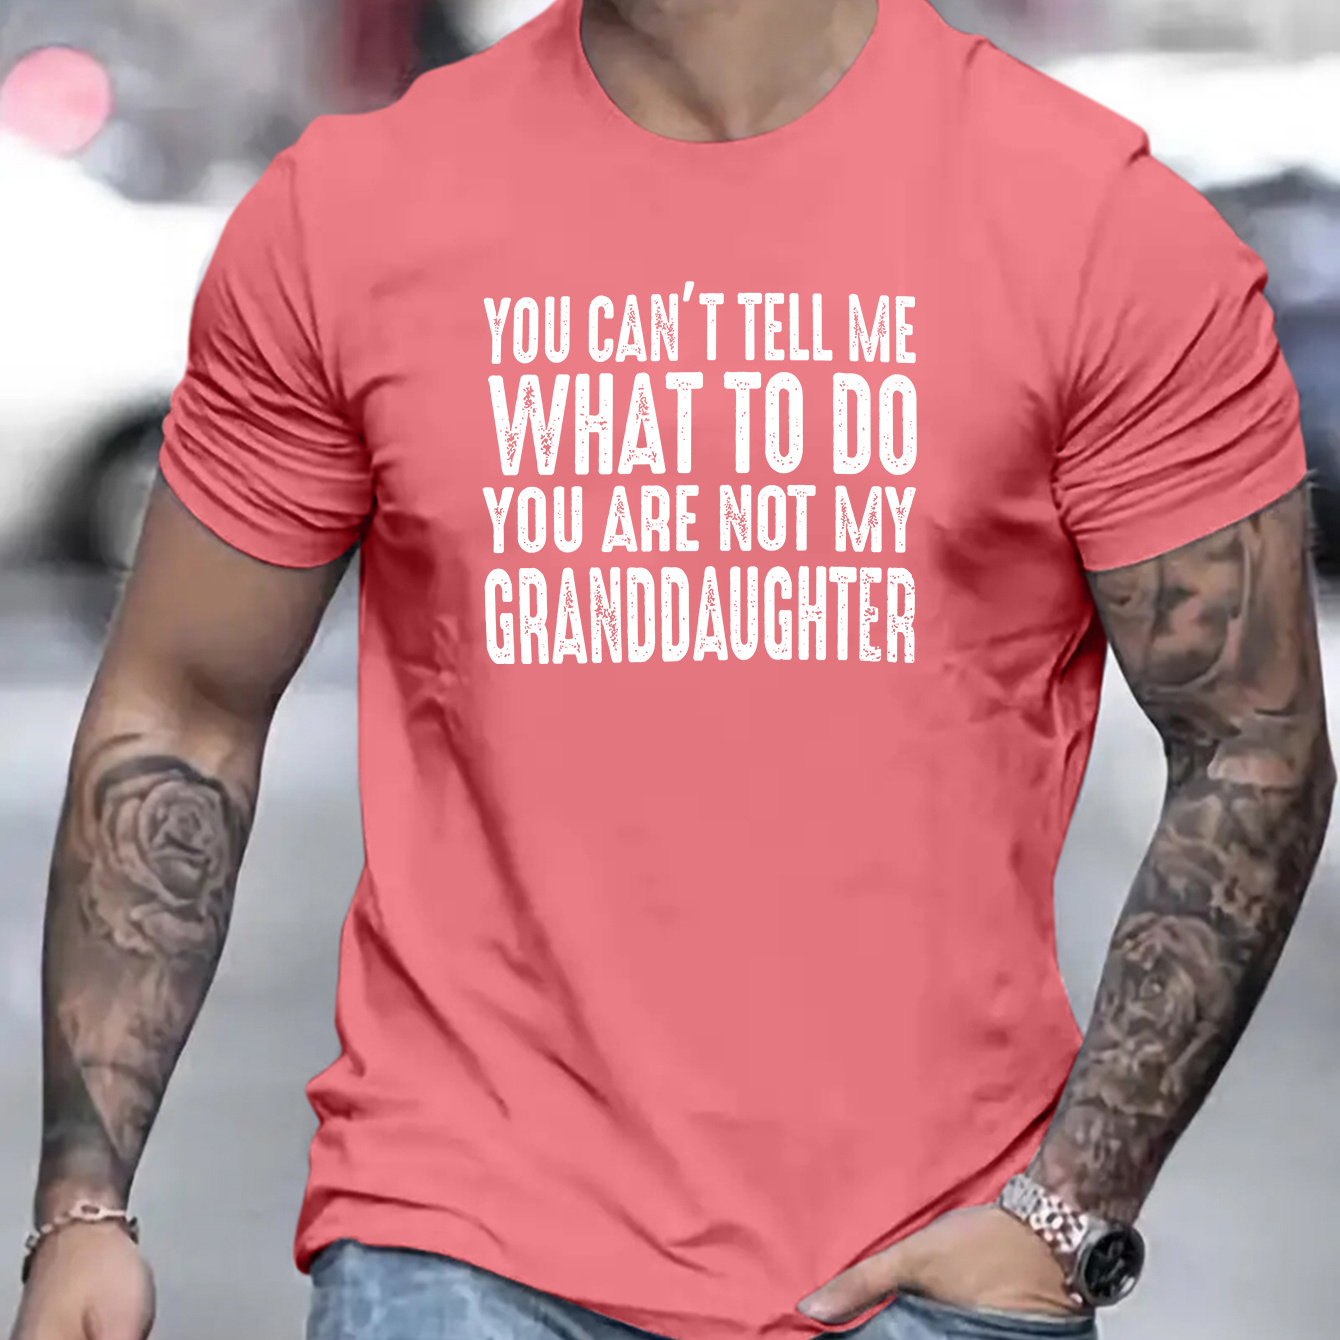 

You Are Not My Granddaughter Print T Shirt, Tees For Men, Casual Short Sleeve T-shirt For Summer